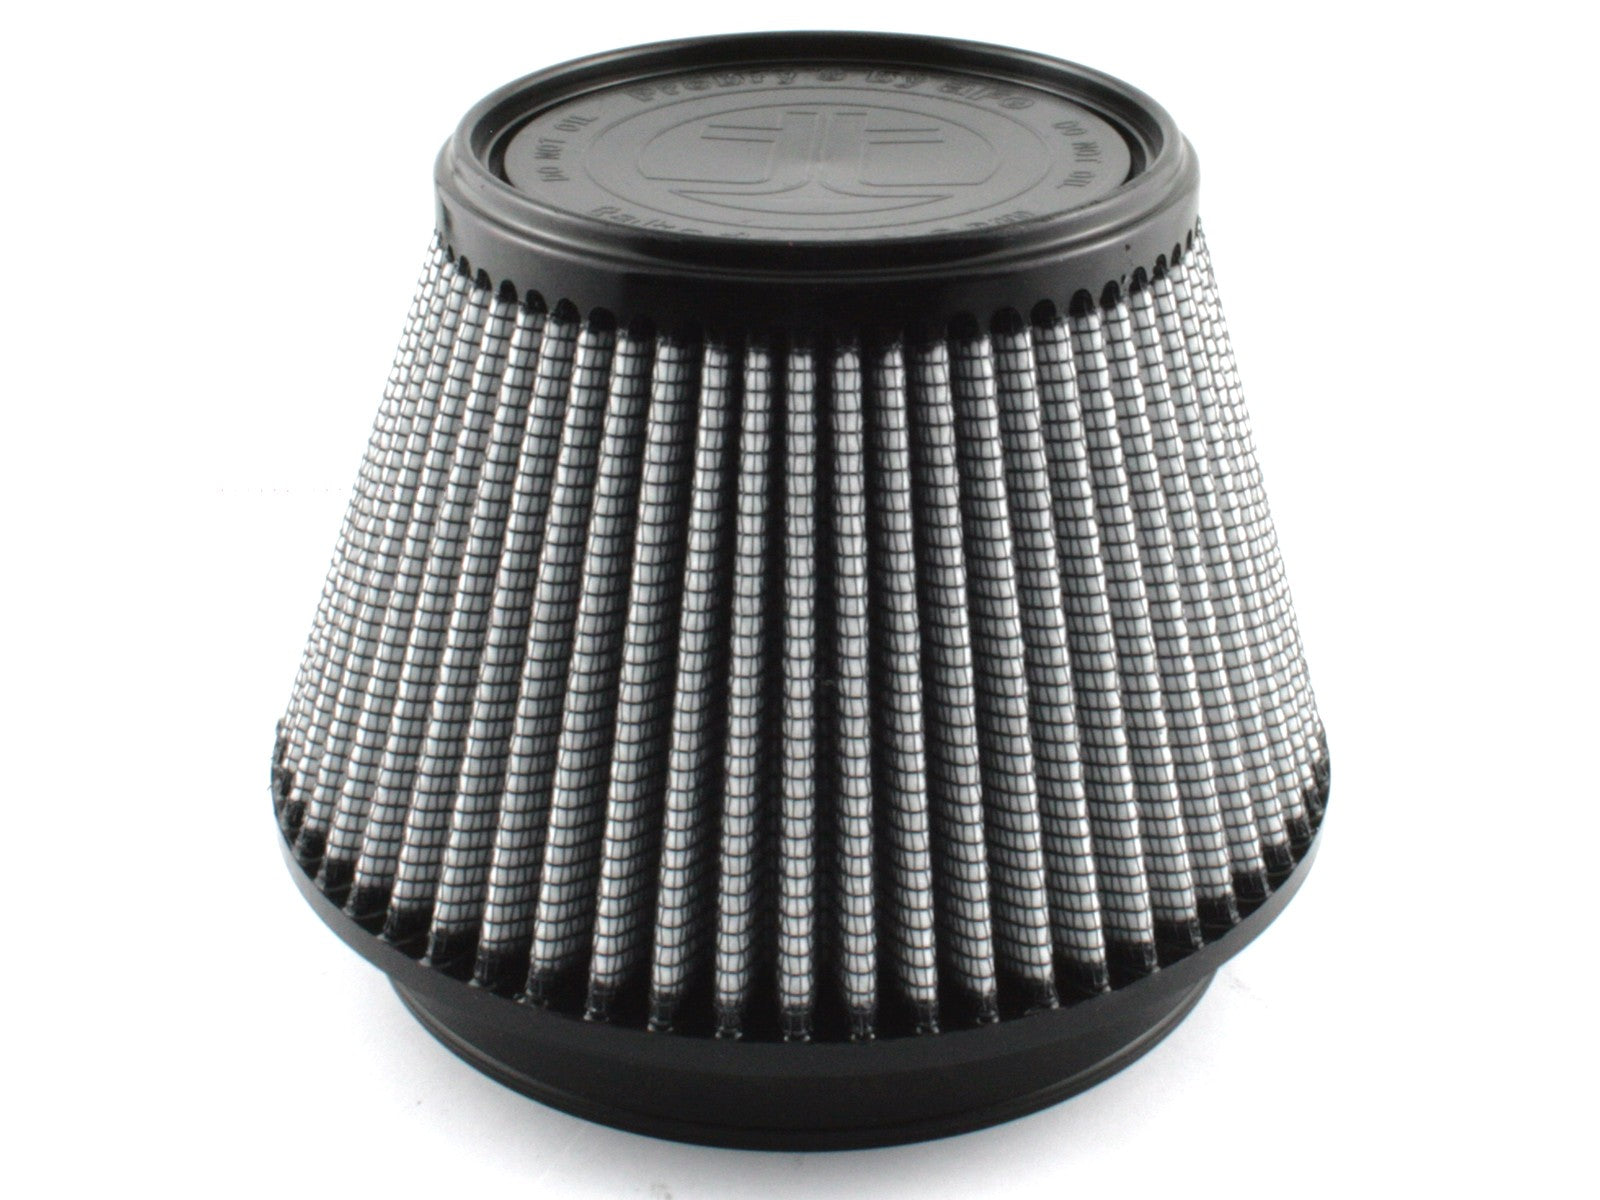 Takeda Intake Replacement Air Filter w/ Pro DRY S Media 5-1/2 IN F x 7 IN B x 4-3/4 IN T x 4-1/2 IN H